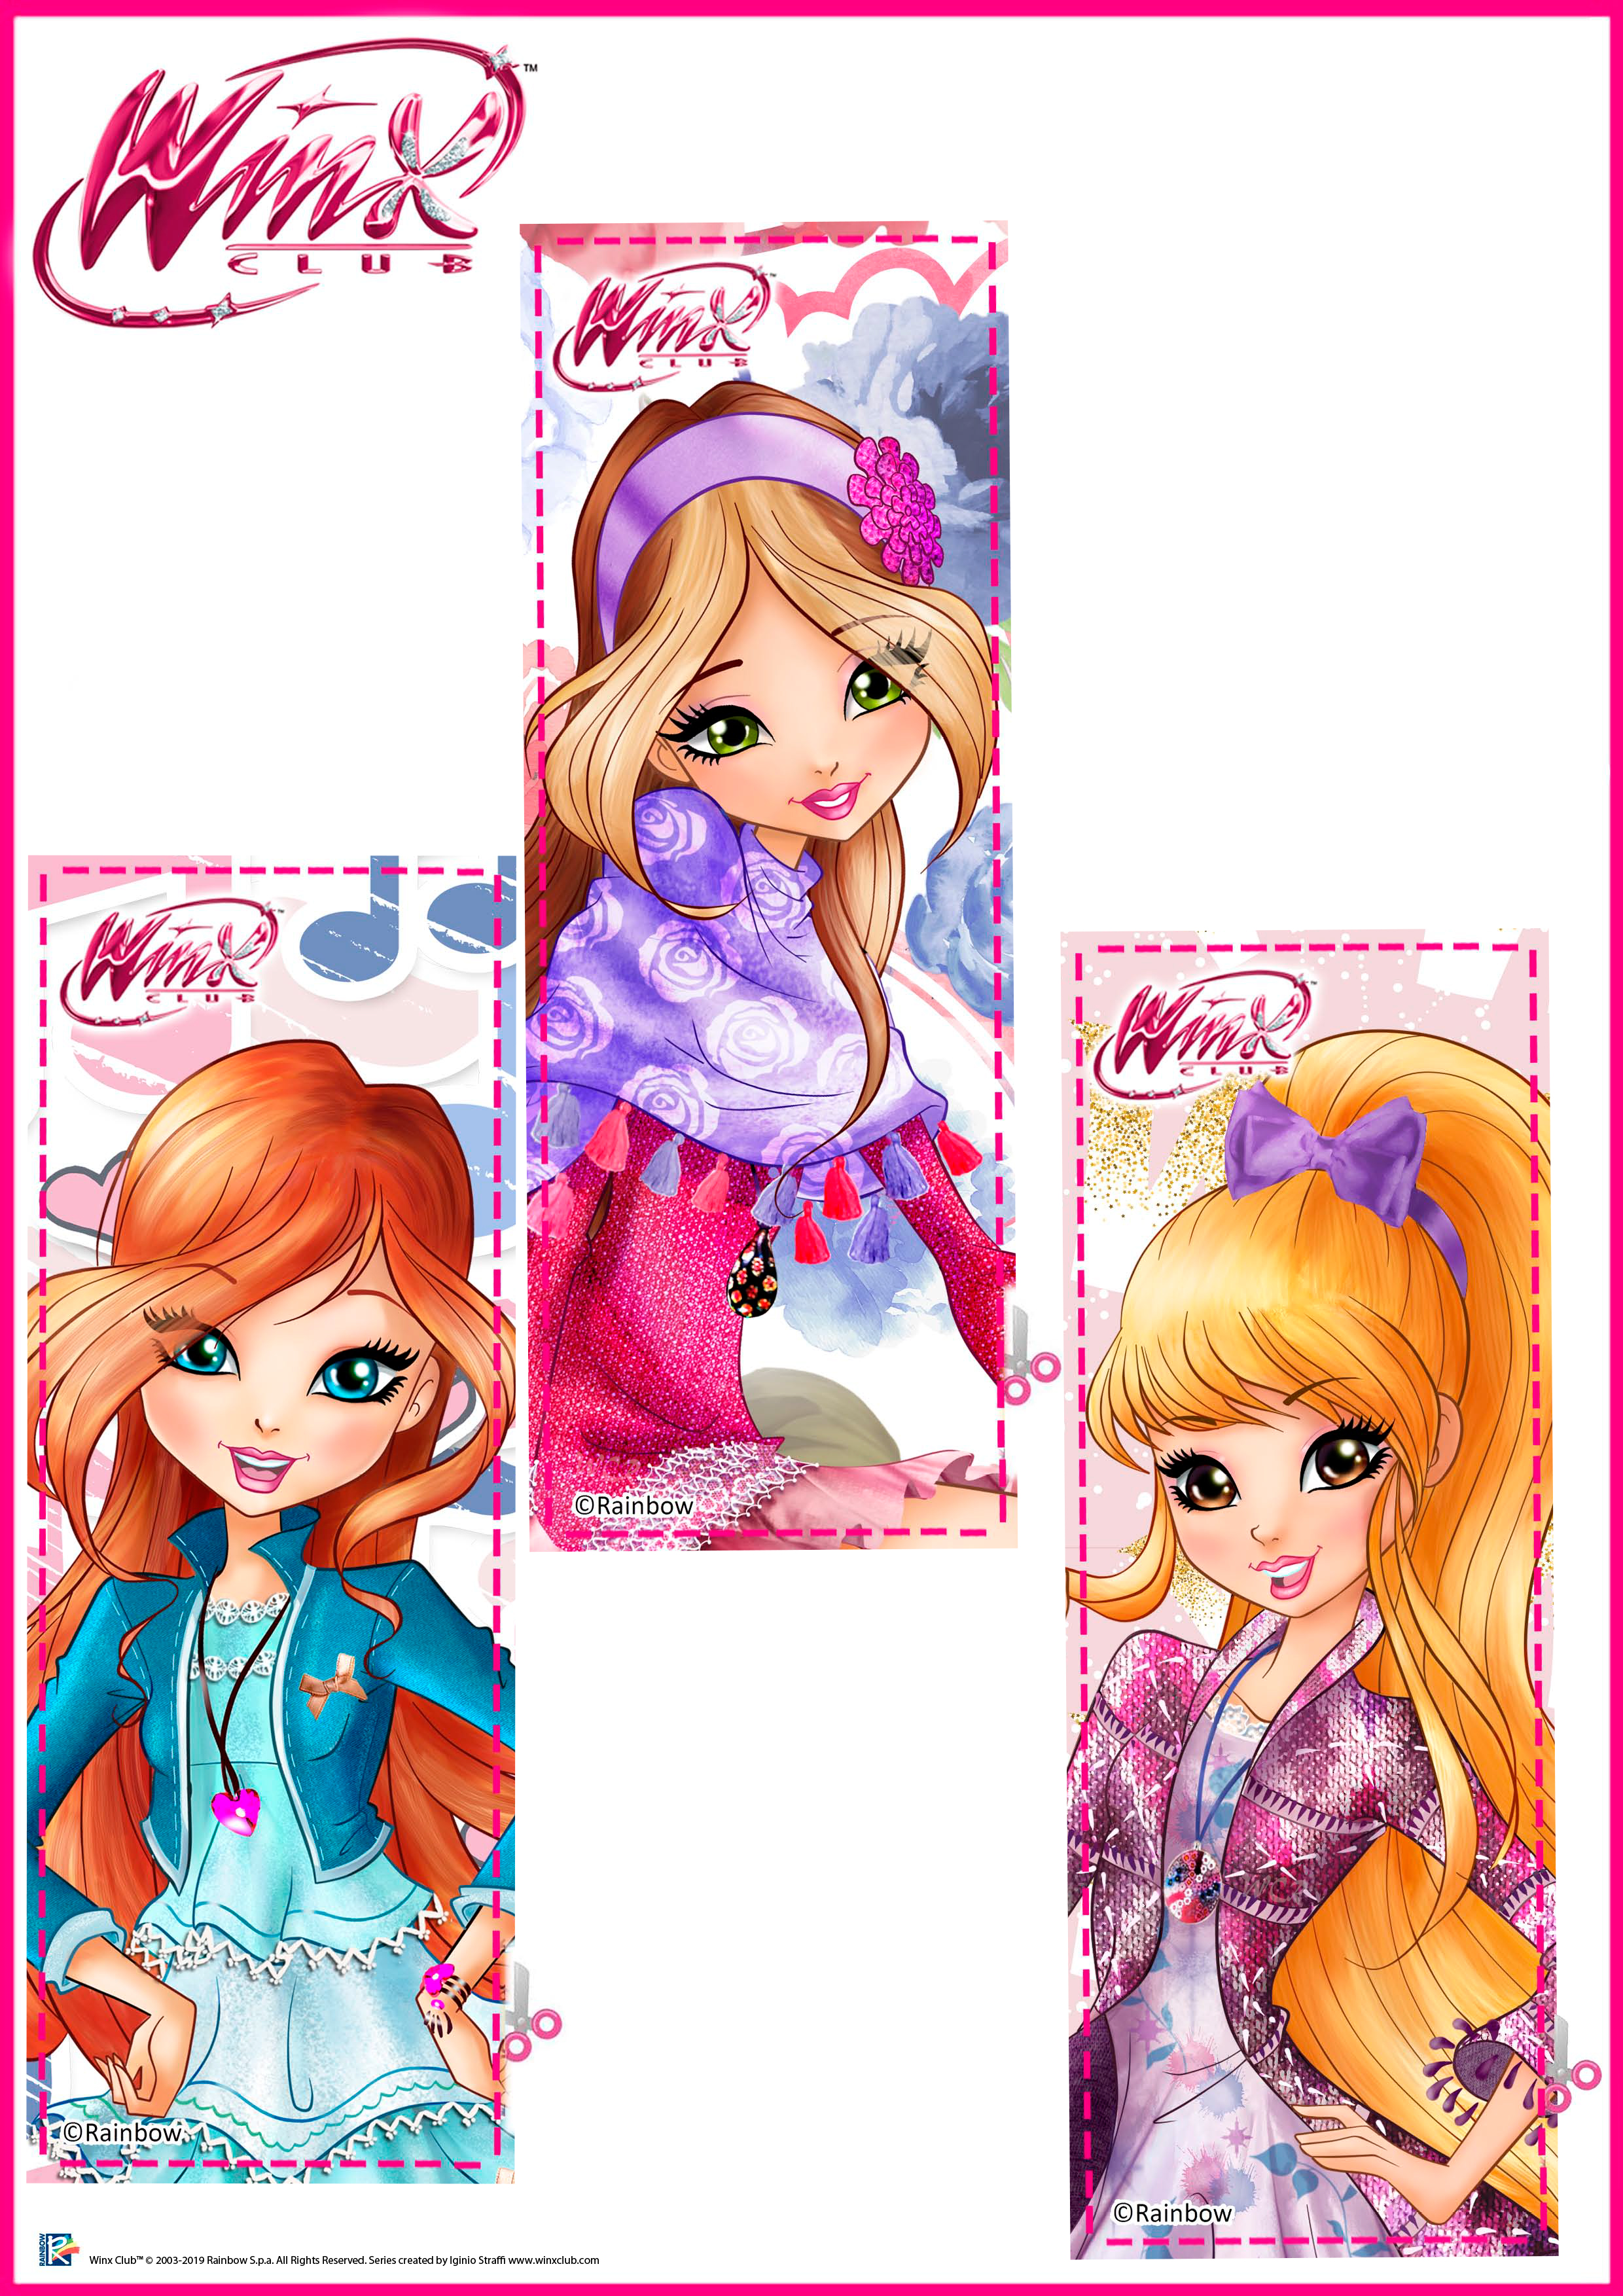 Winx Club season 8 bookmarks with Bloom, Flora and Stella's arts -  